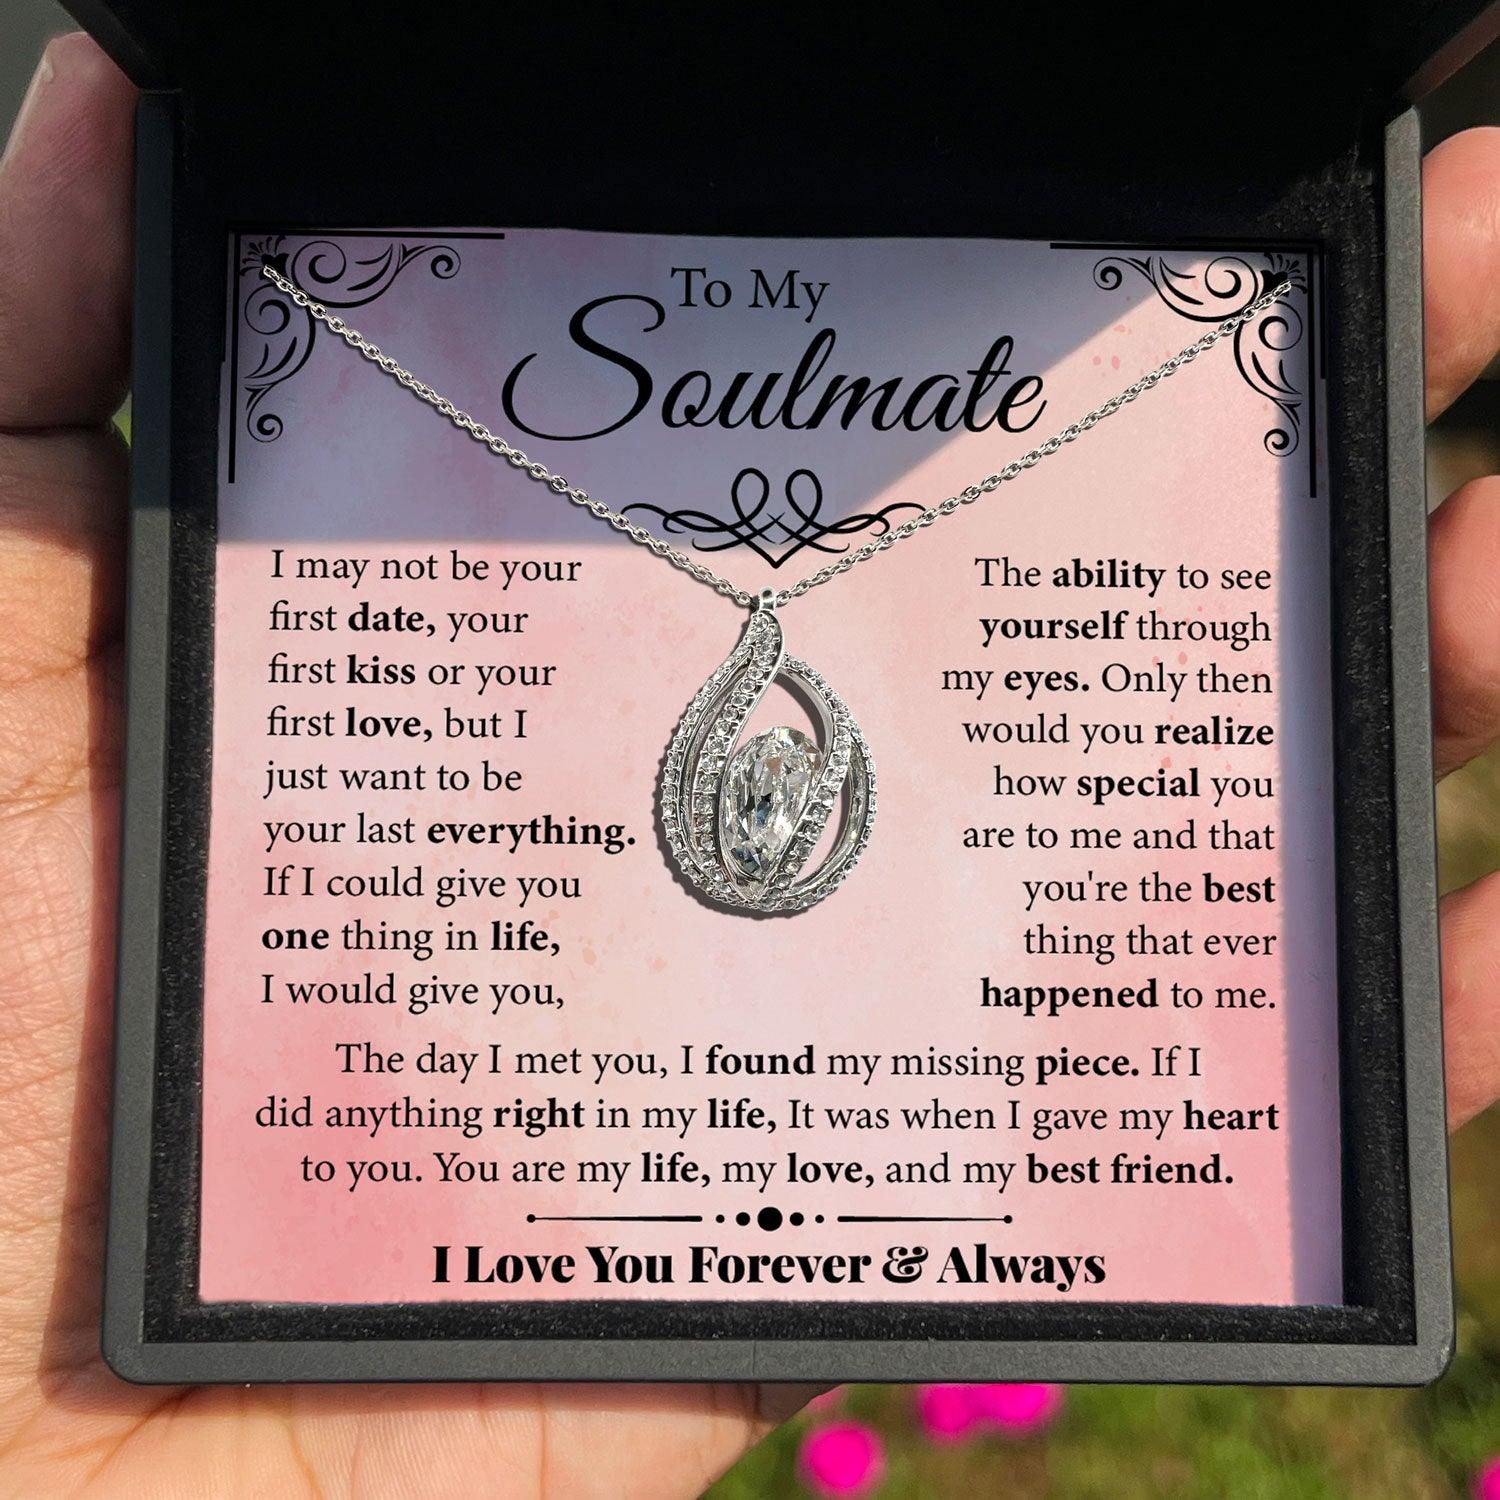 To My Soulmate - I Just Want To Be Your Last Everything - Orbital Birdcage Necklace - TRYNDI